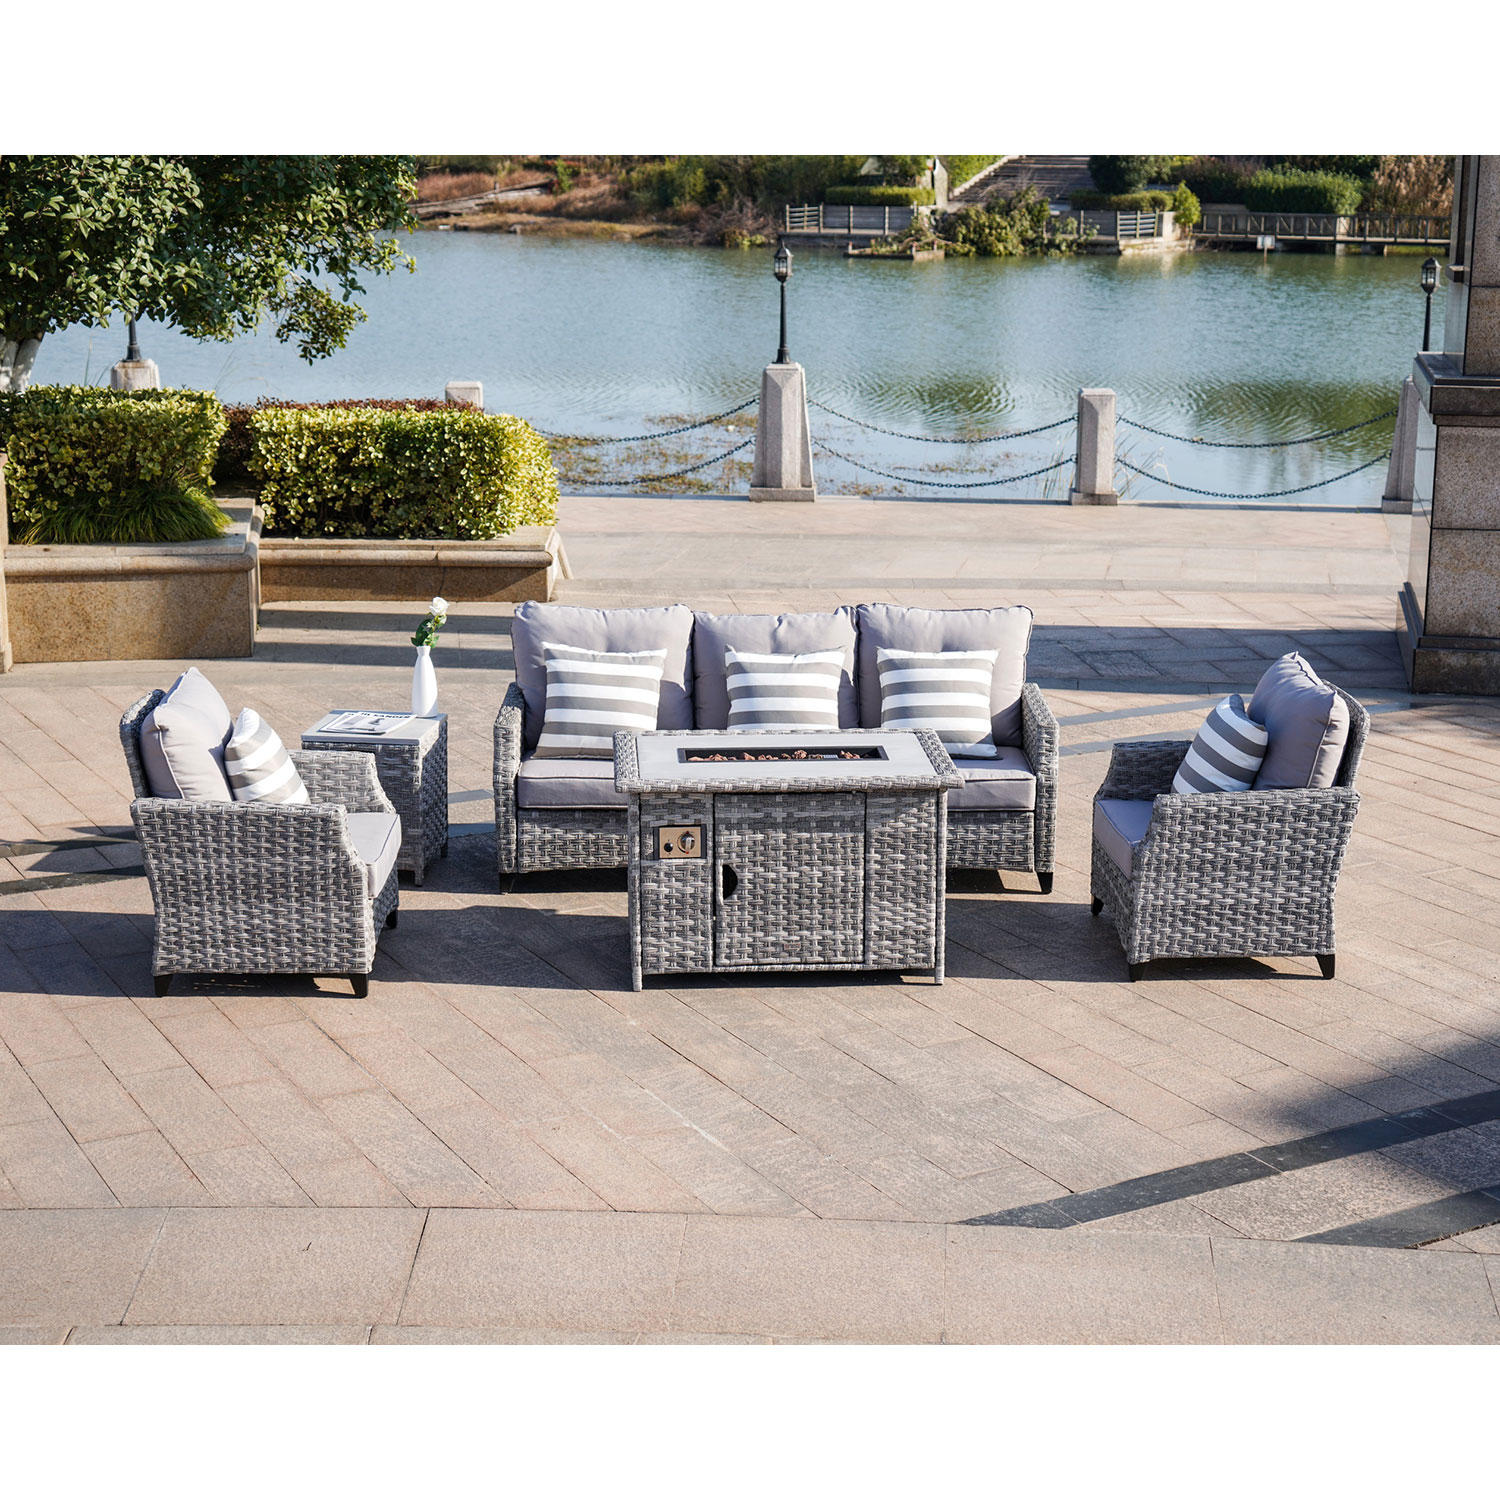 Moda Furnishings Grice 5-Piece Wicker Patio Conversation Set with Gas Fire Pit Table